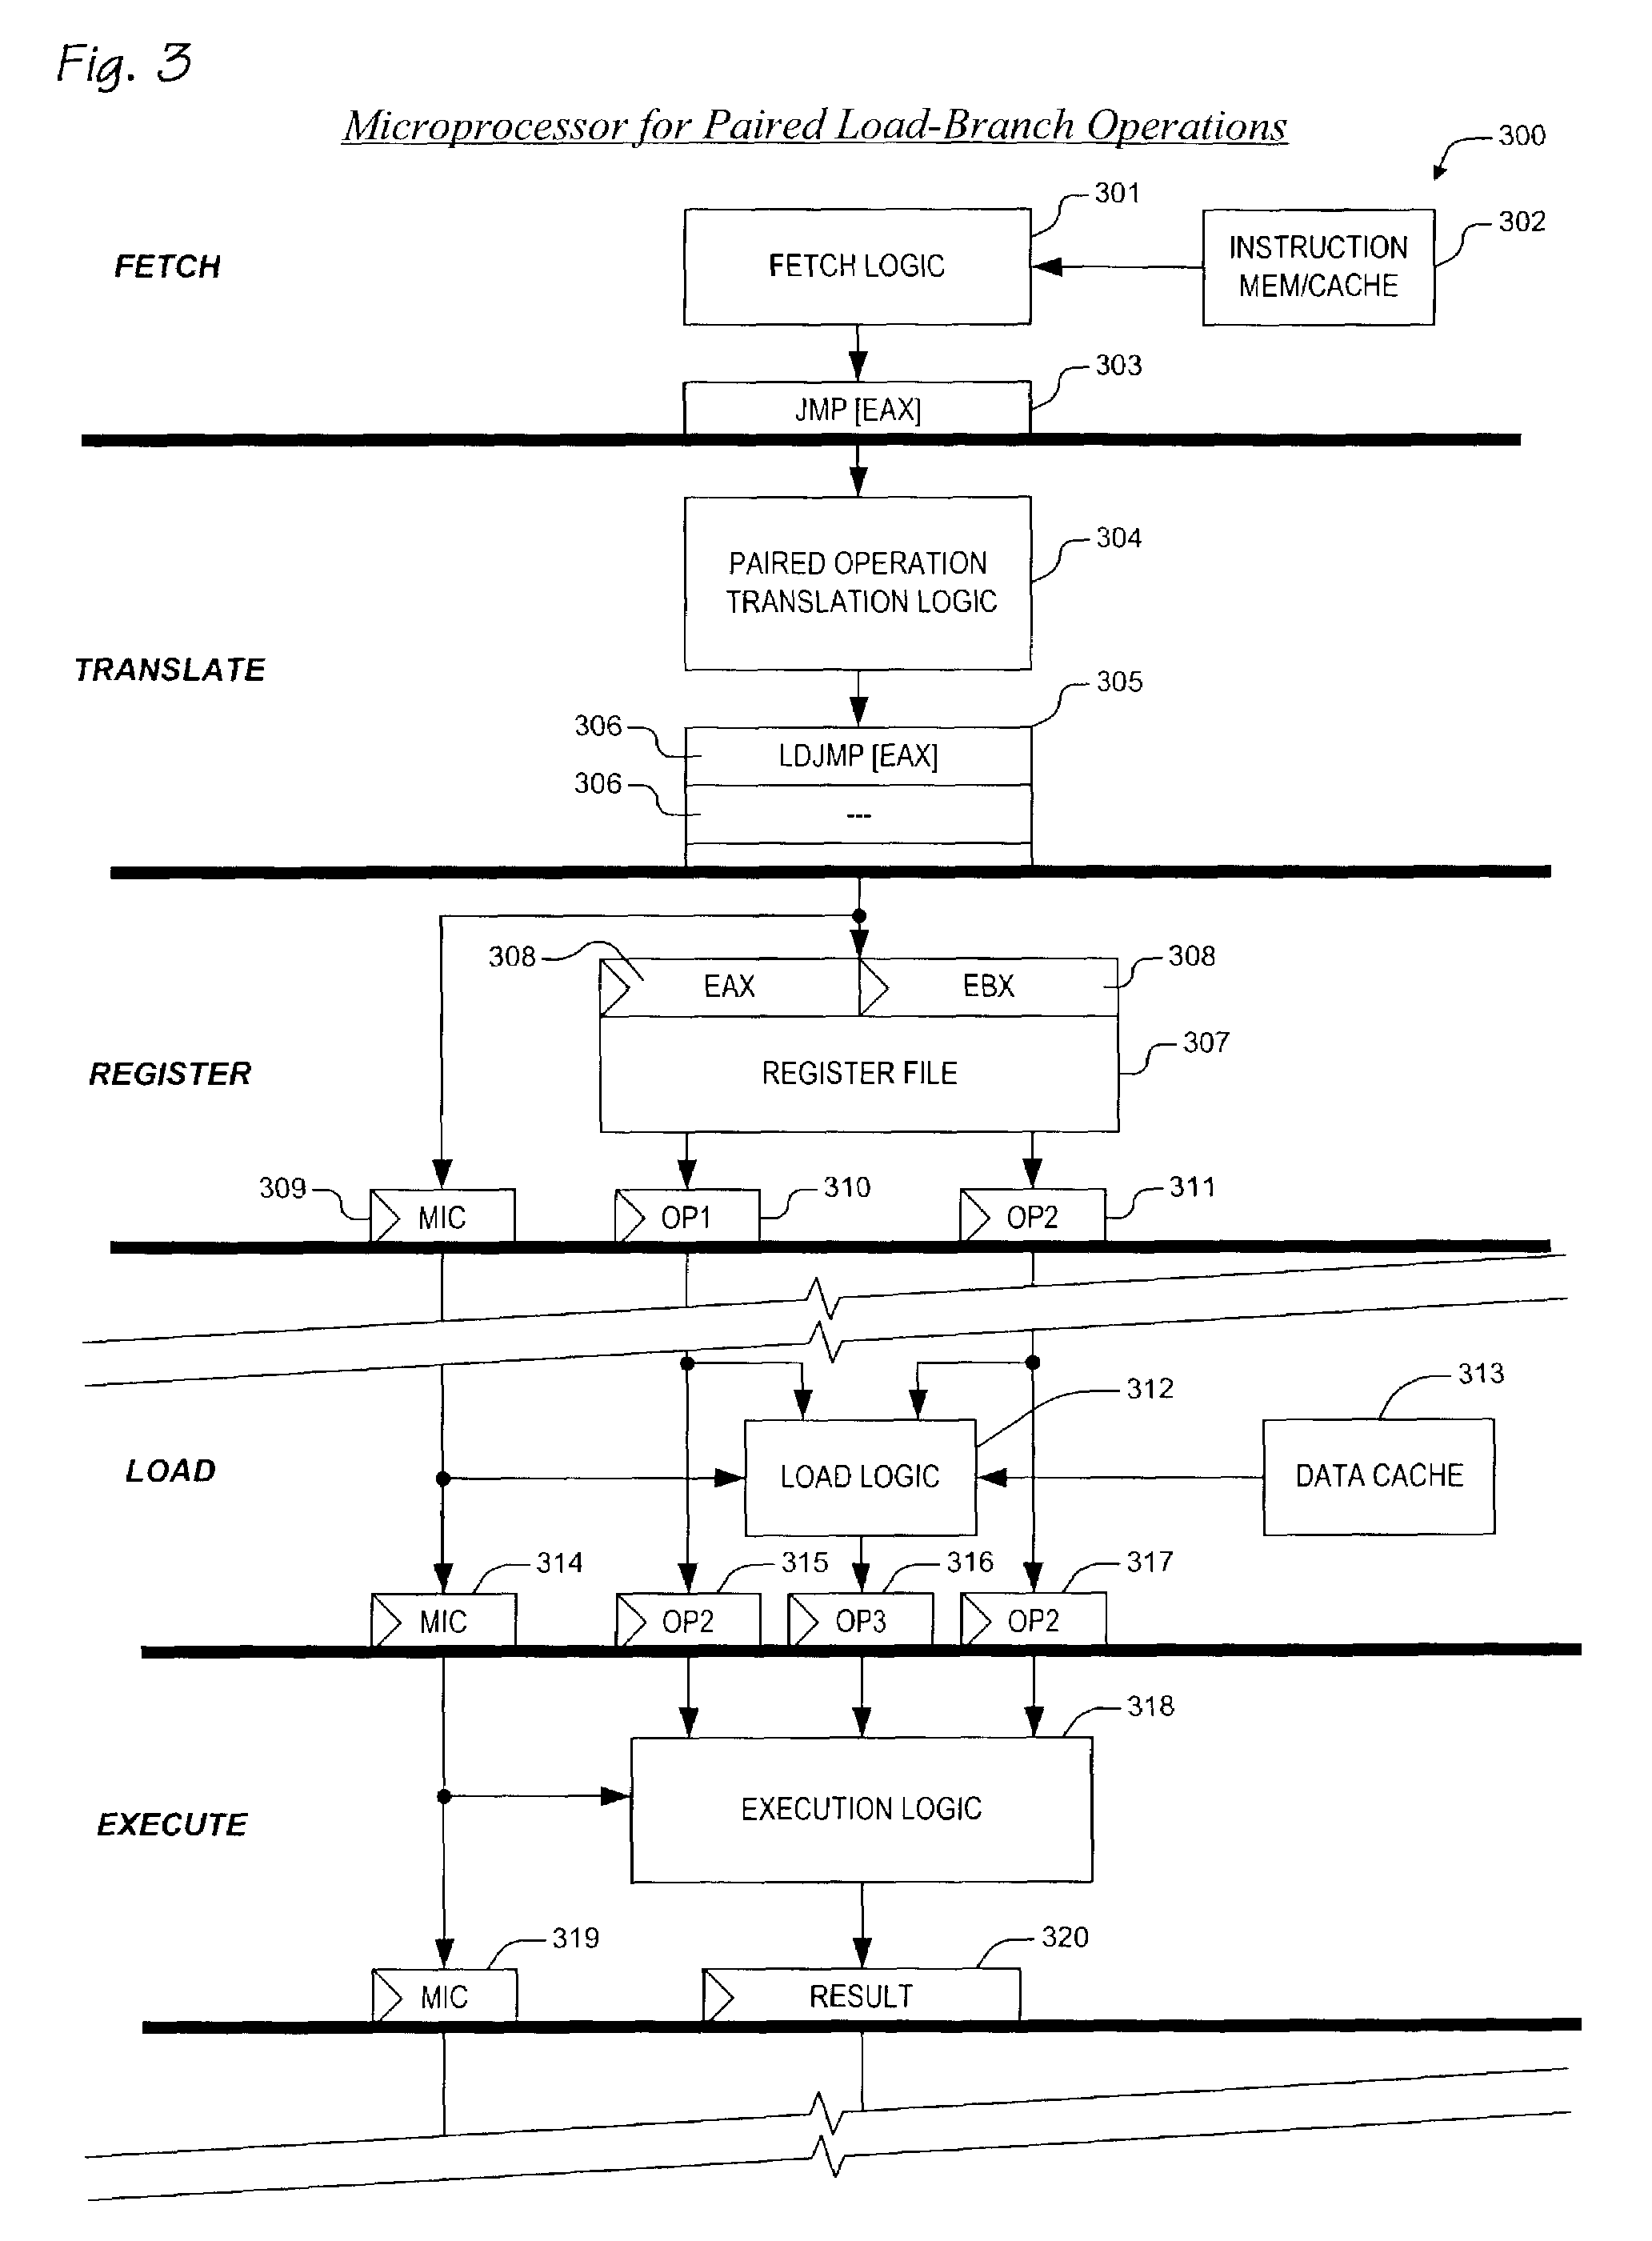 Paired load-branch operation for indirect near jumps